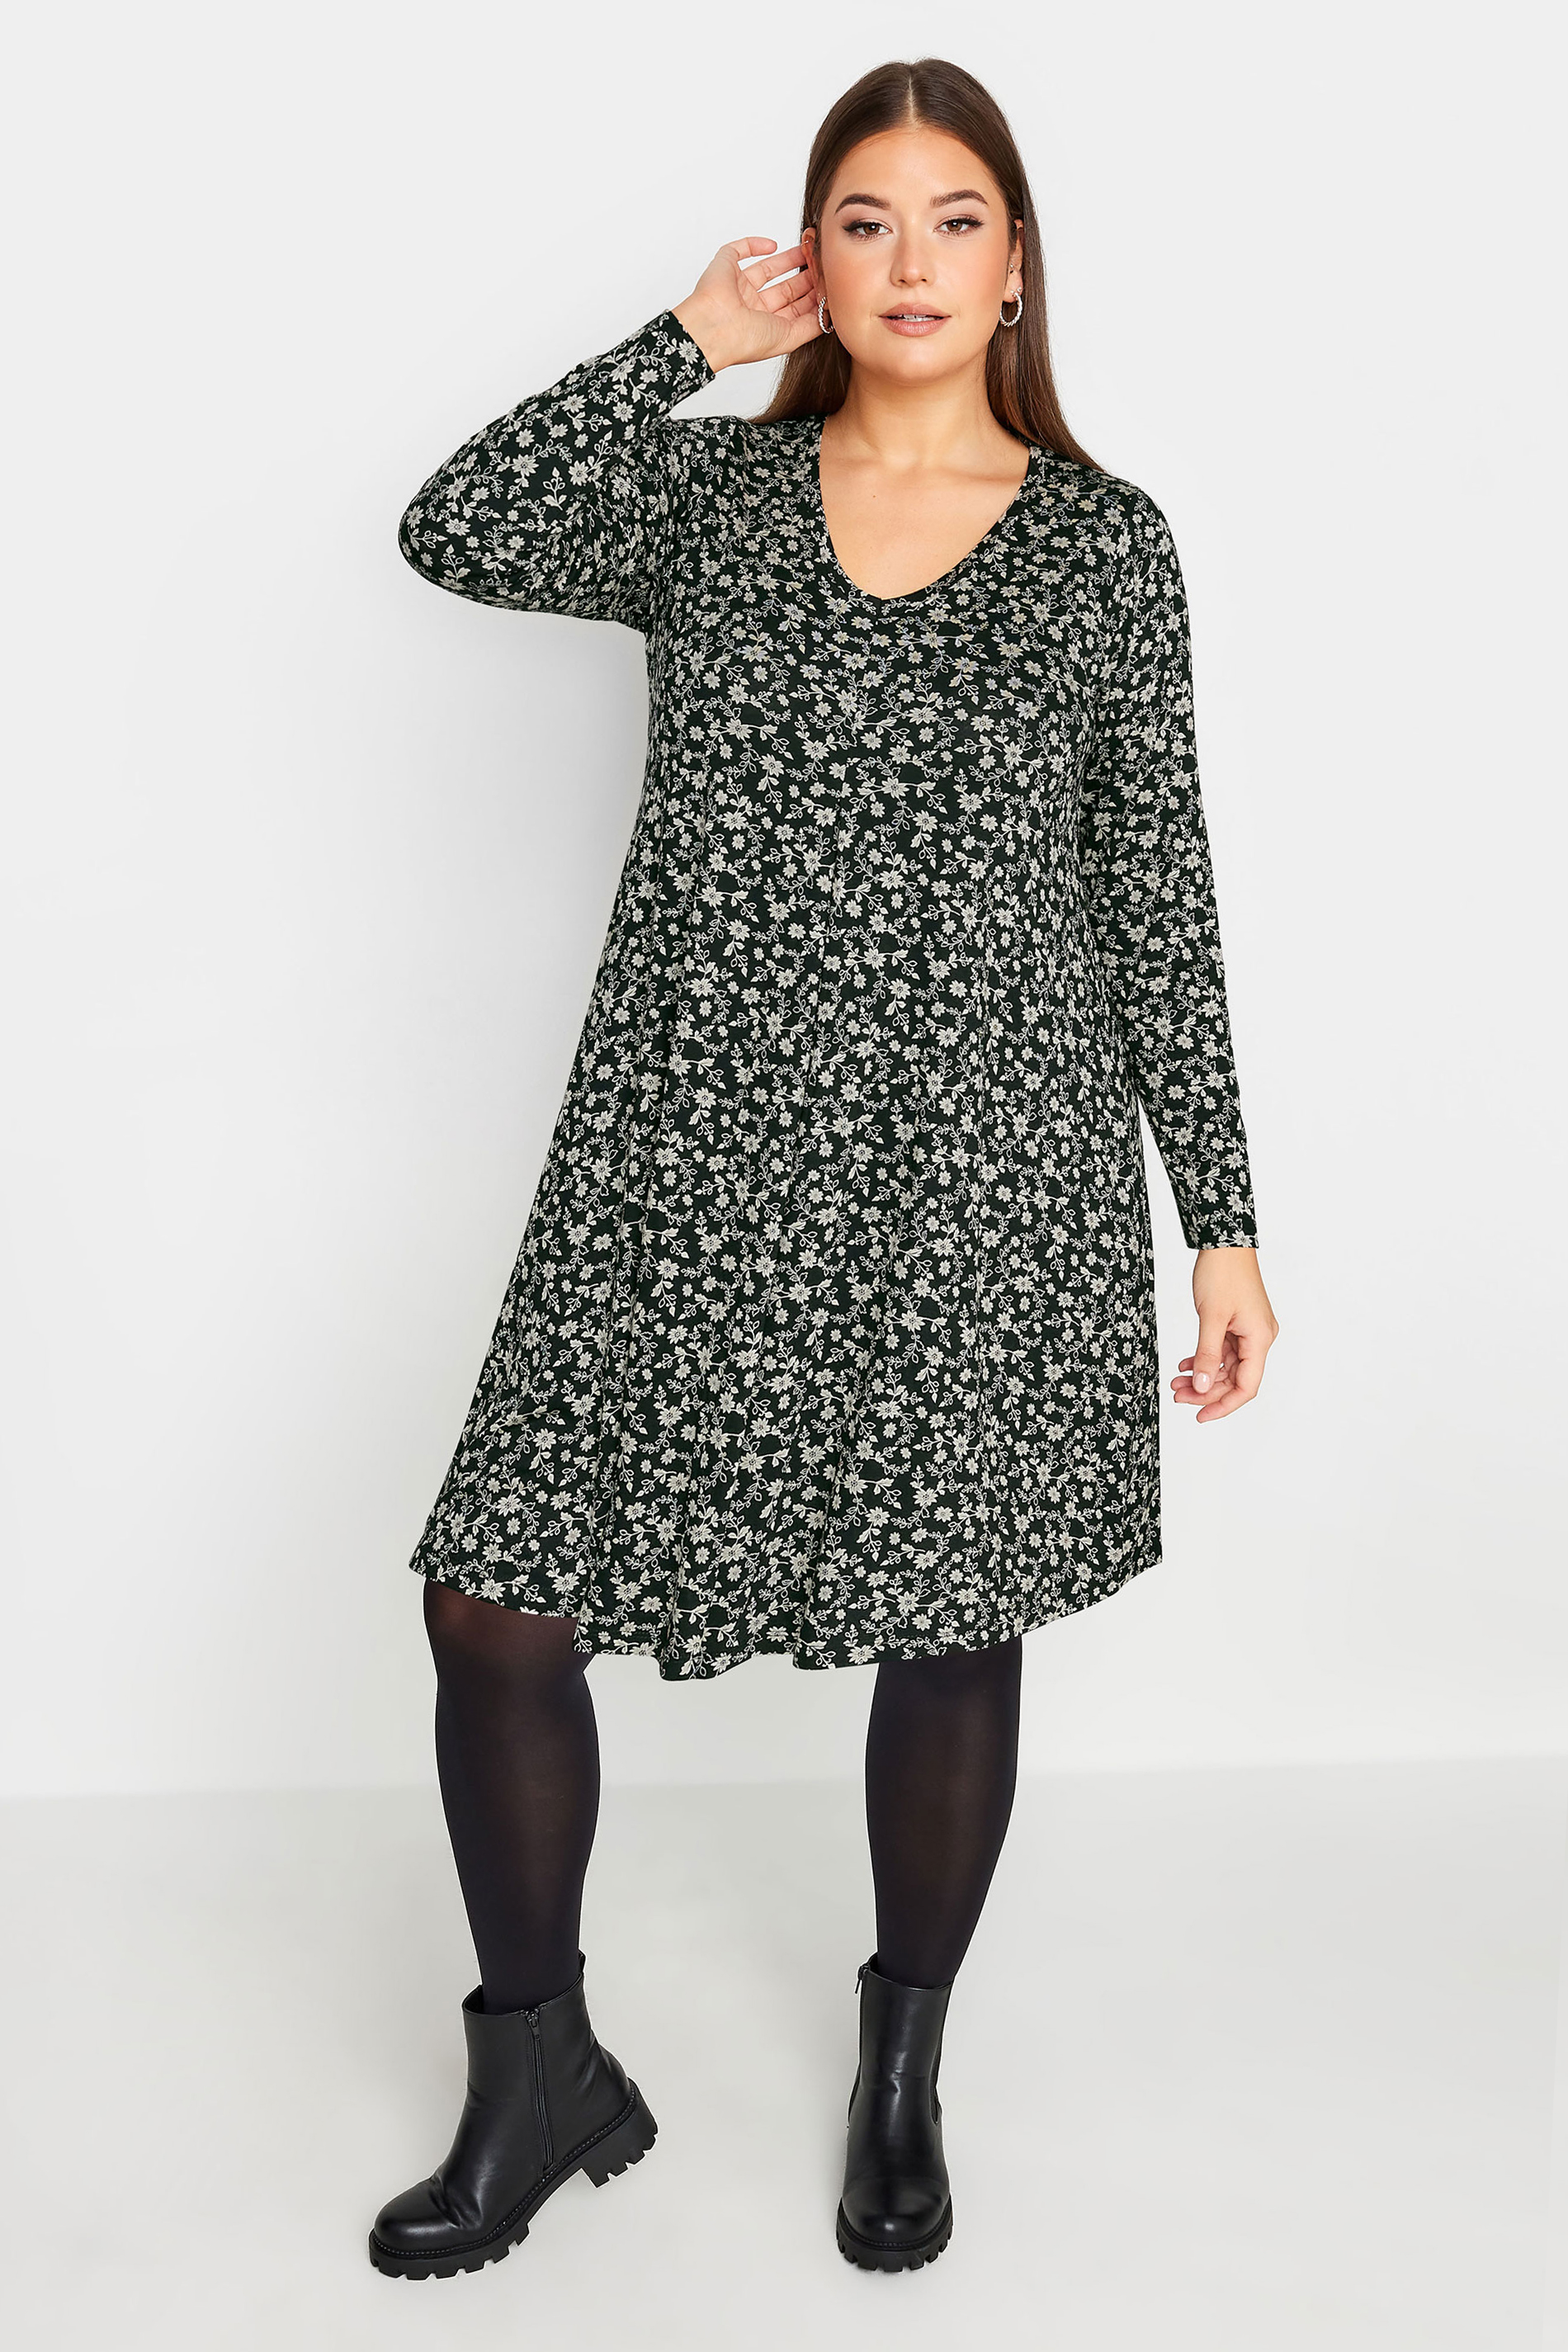 YOURS Plus Size Black Ditsy Floral Print Swing Dress | Yours Clothing